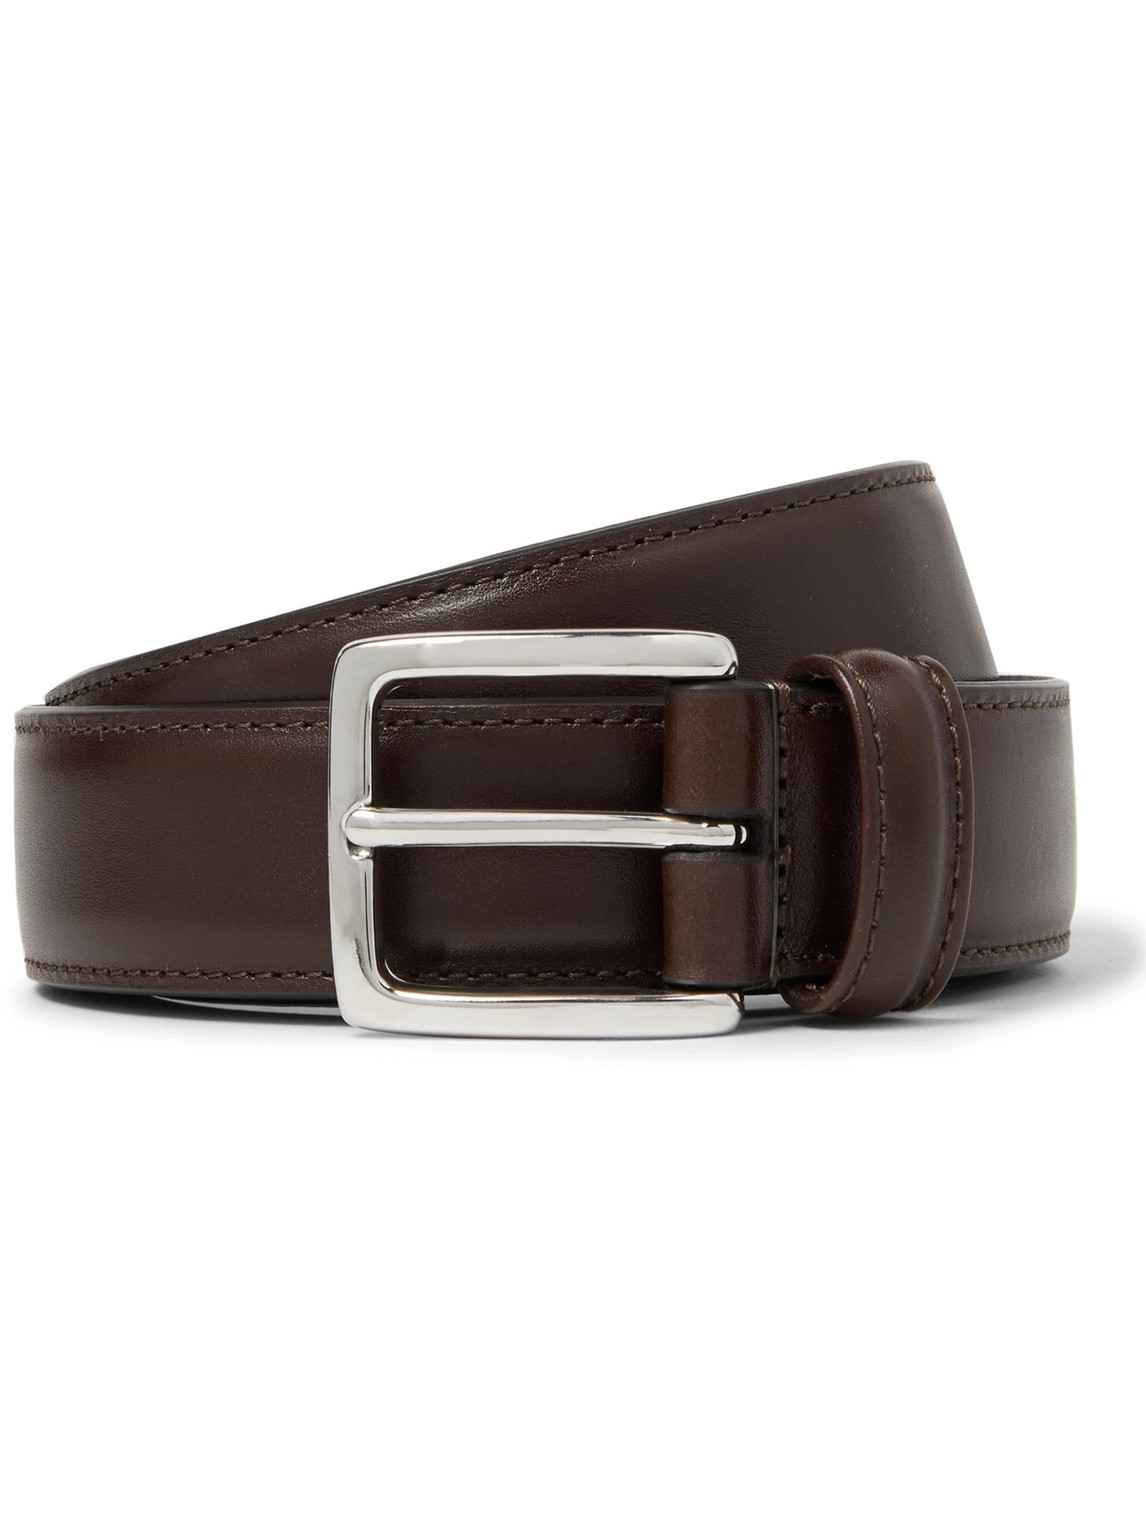 Anderson's Andersons Leather Belt - Brown 3cm